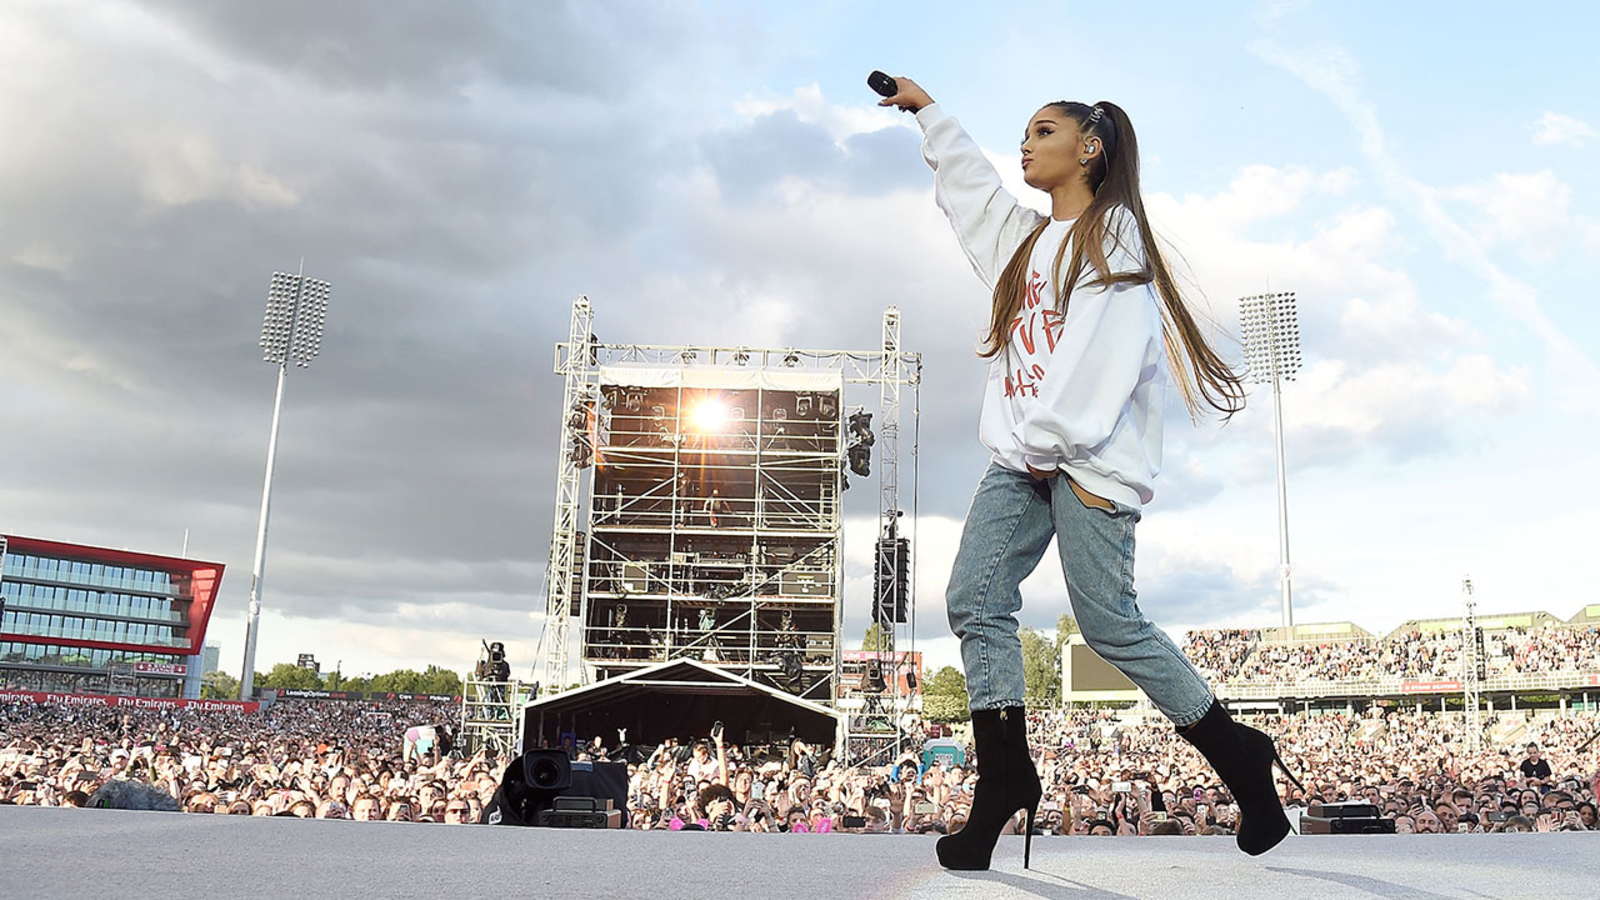 PHOTOS: Ariana Grande and others spread the love during One Love Manchester concert New York